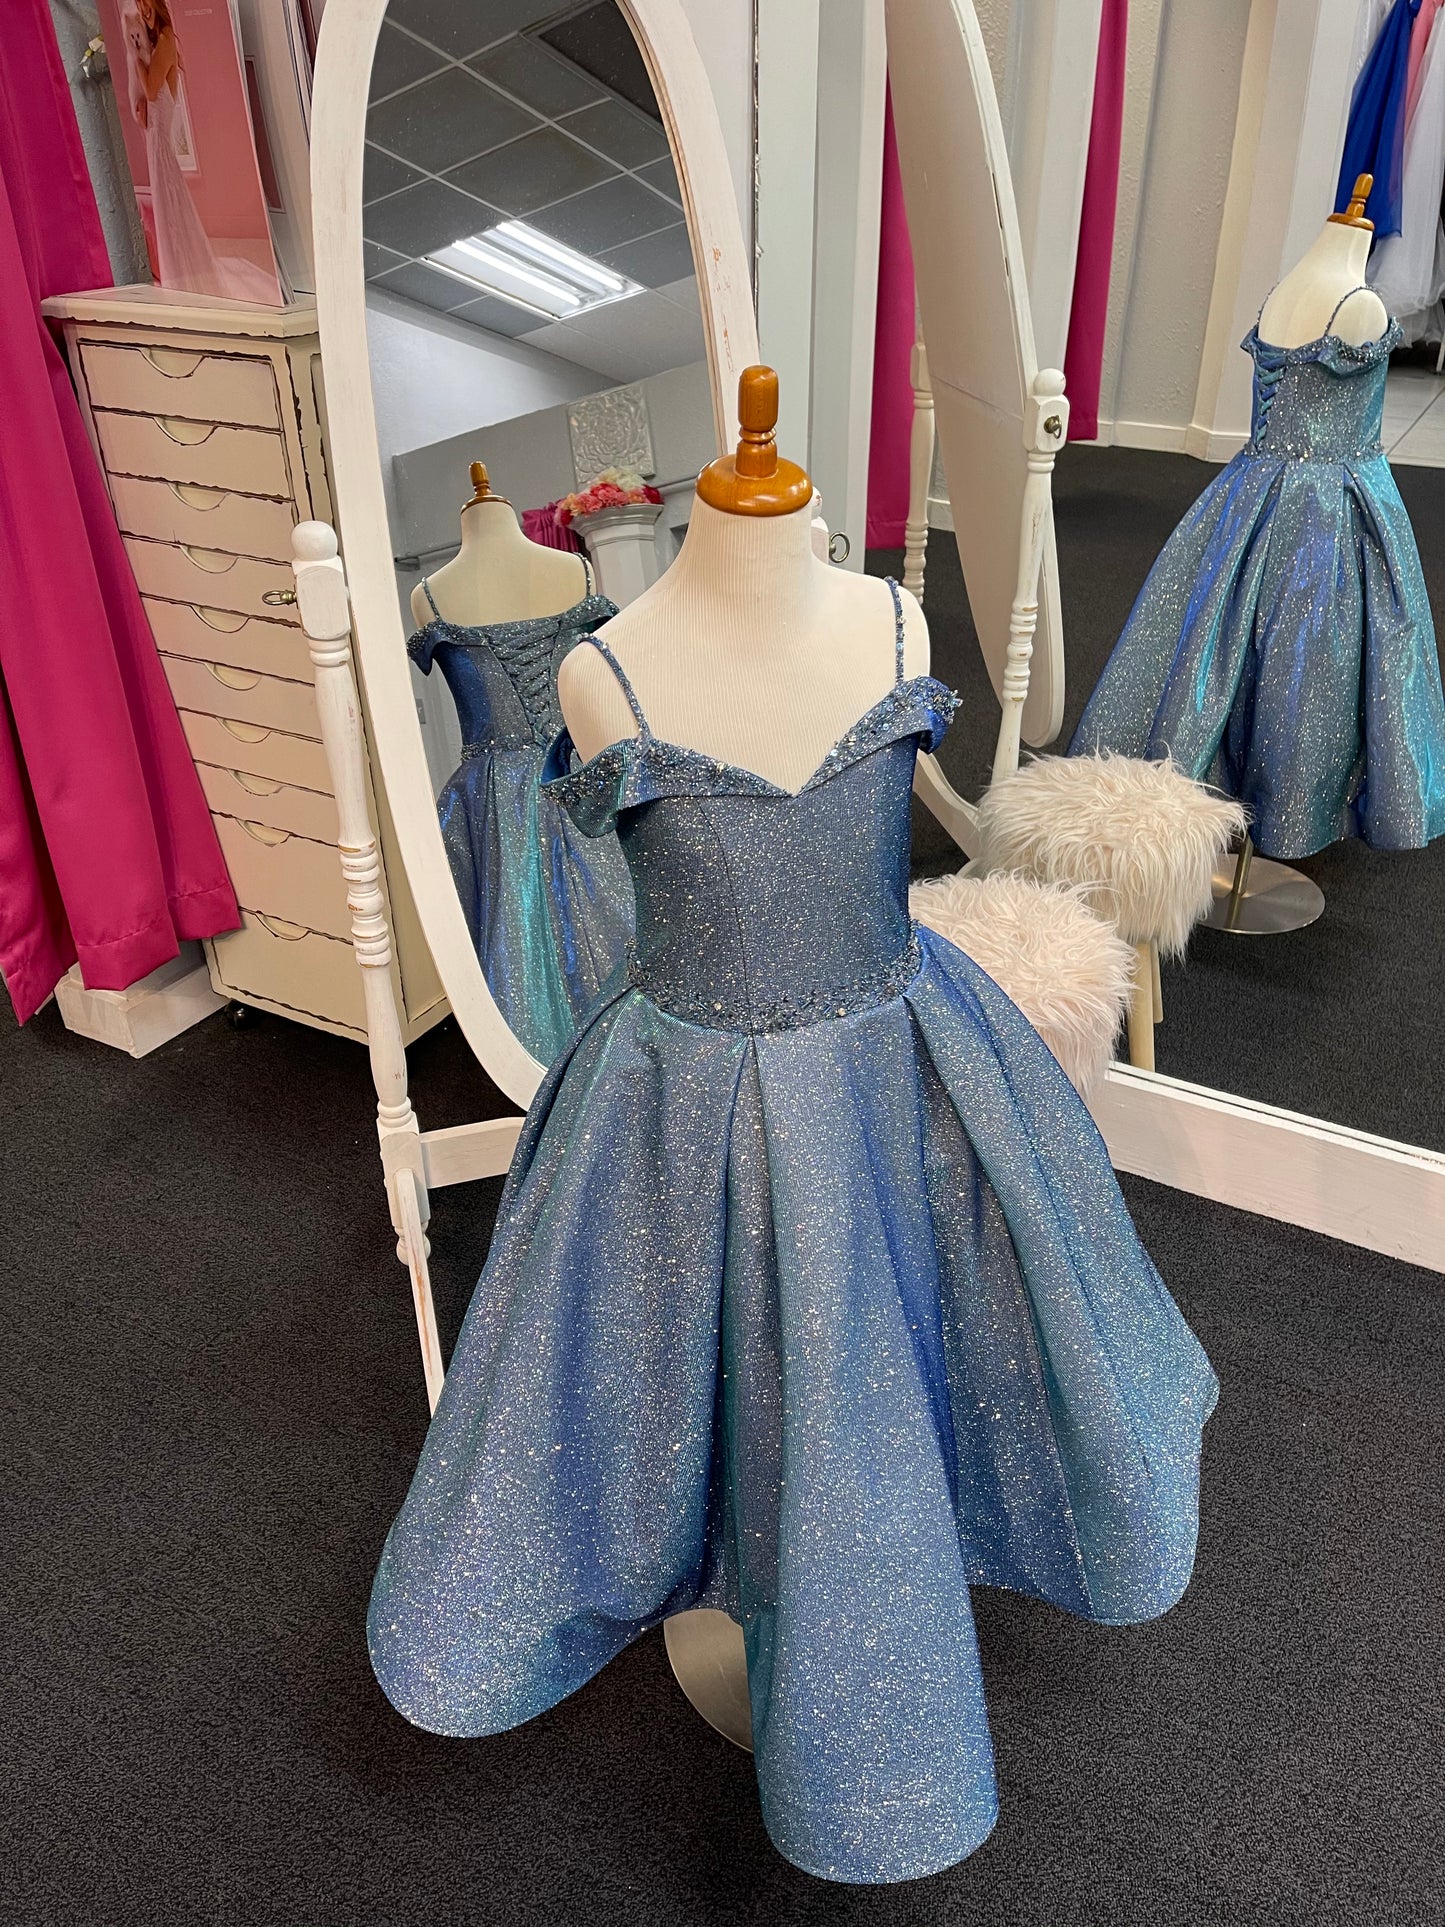 Dancing Queen K743 Off the shoulder girls long pageant dress or party dress iridescent shimmer A line Gown.Dancing Queen K743 Off the shoulder girls long pageant dress or party dress iridescent shimmer A line Gown.  Color: Blue  Size: 6